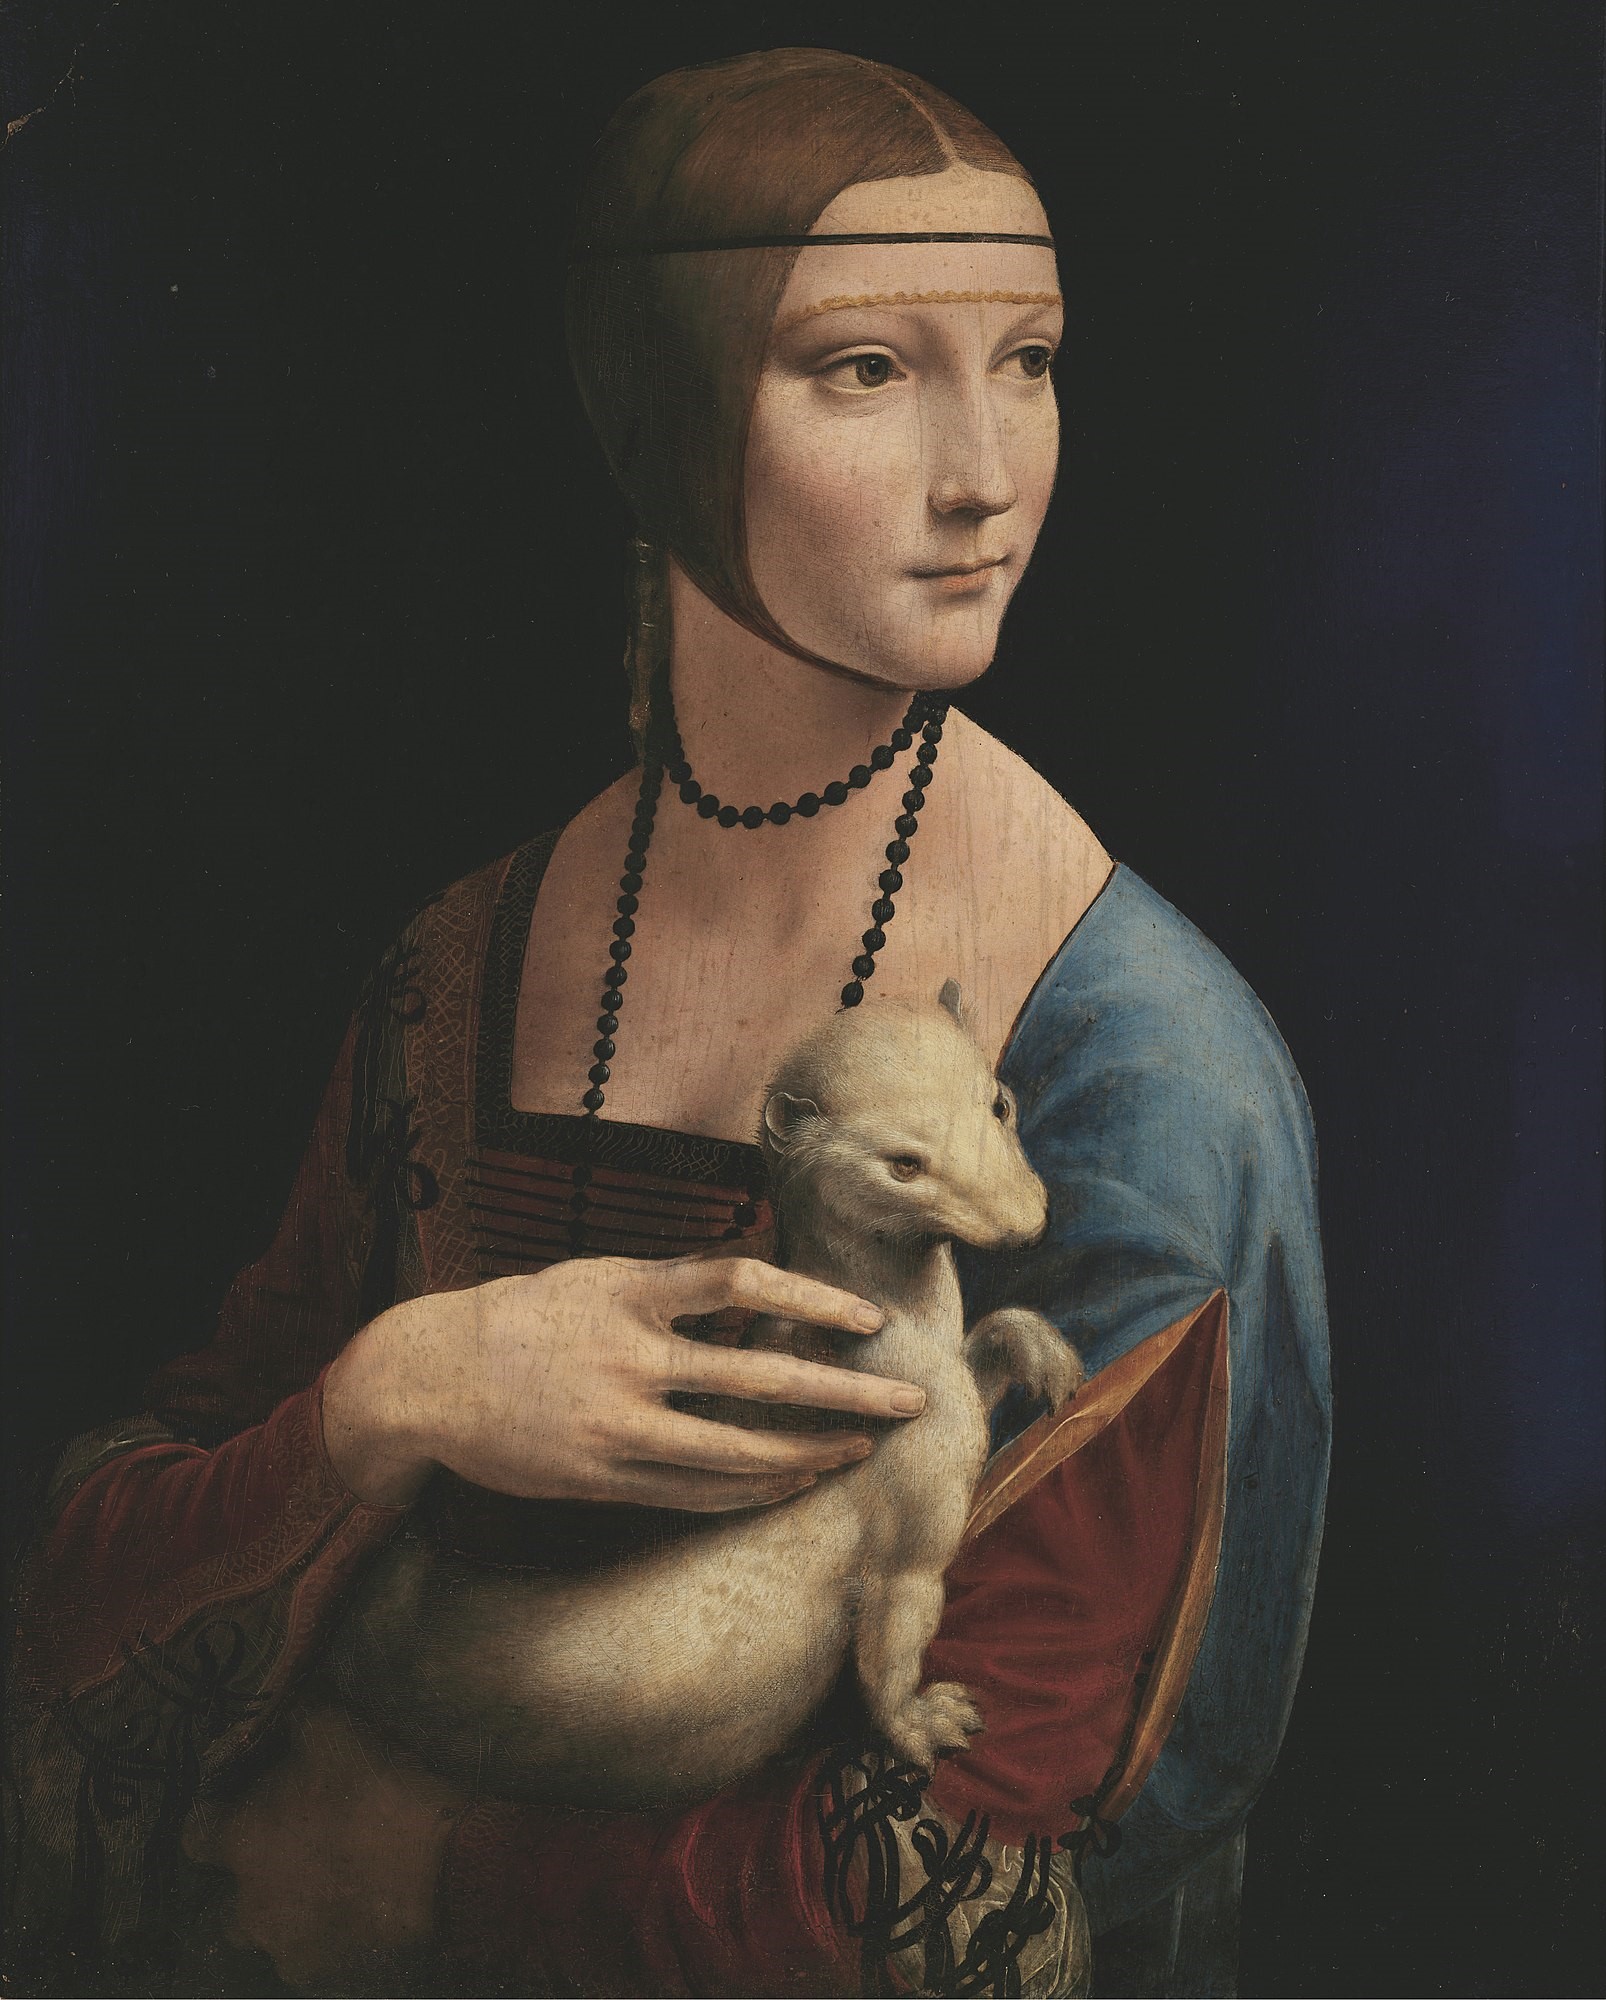 Pintura "Lady with an Ermine"